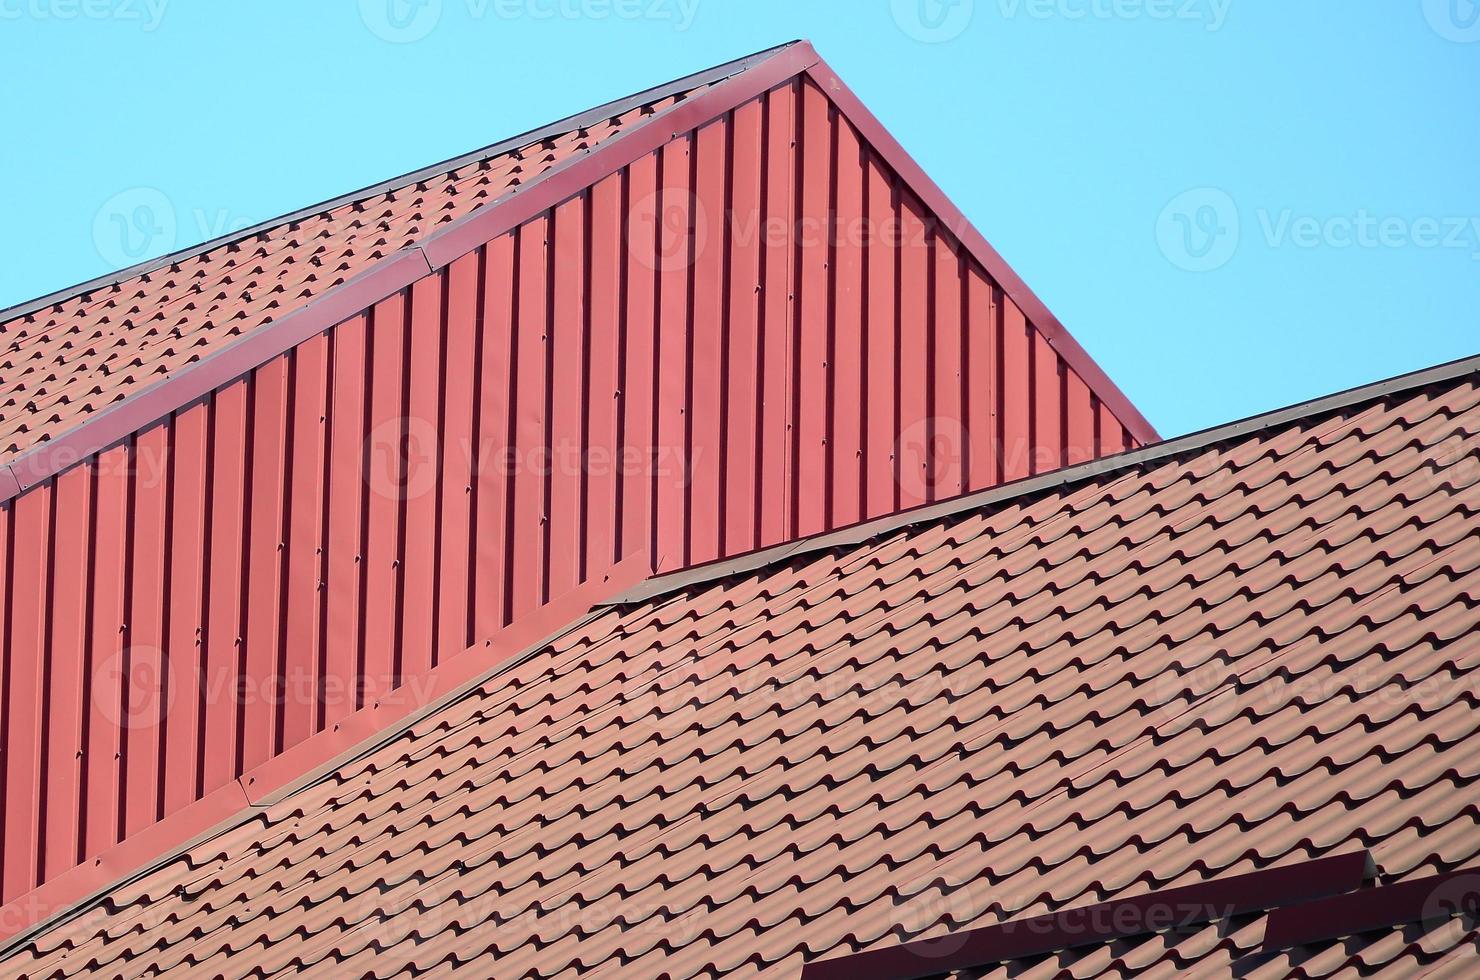 A fragment of a roof from a metal tile of dark red color. Quality Roofing photo